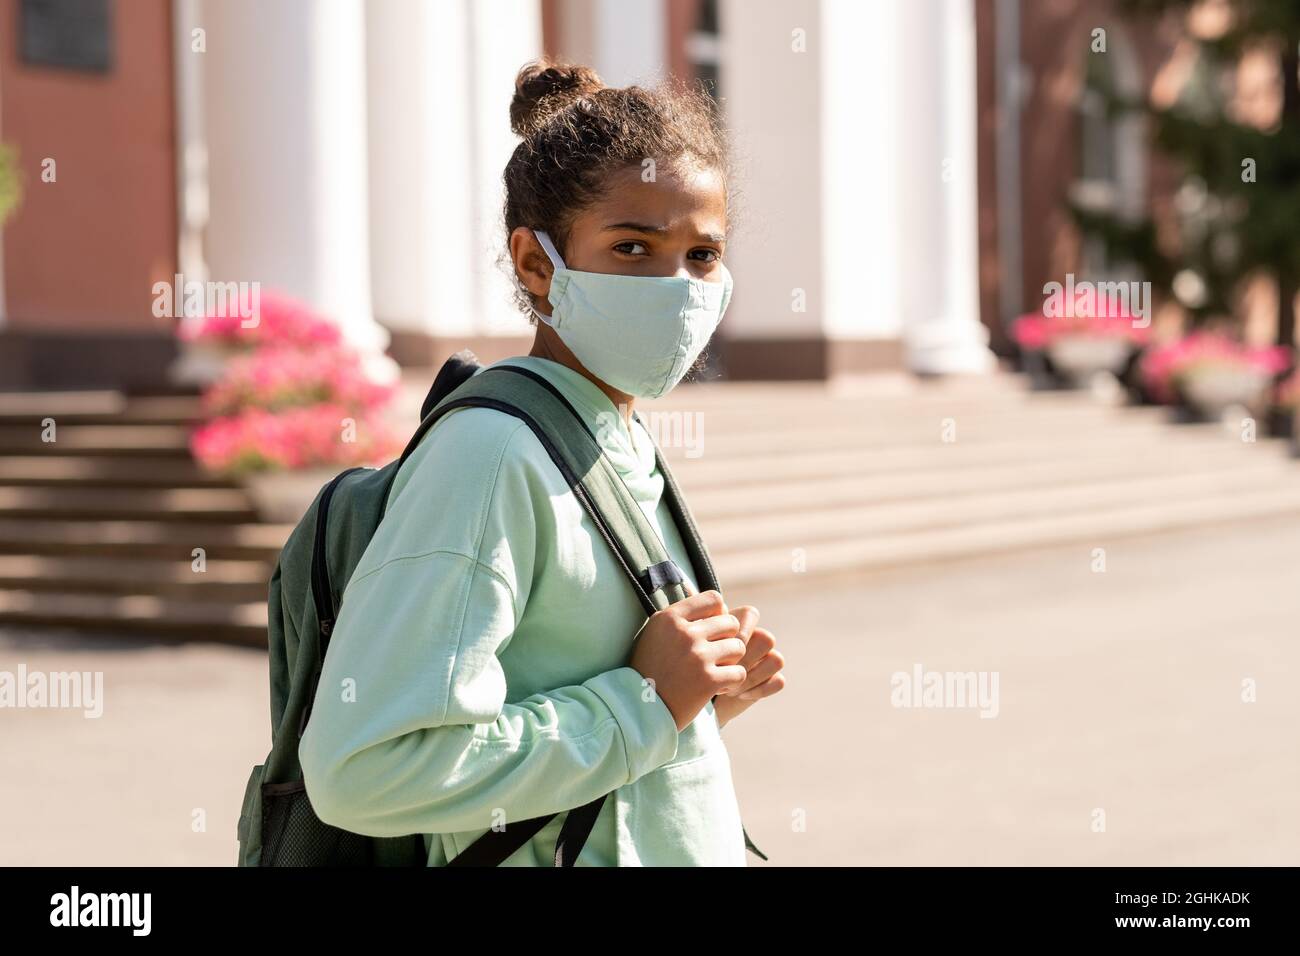 Cute mixed-race schoolgirl in casualwear and protective mask going to school in the morning Stock Photo